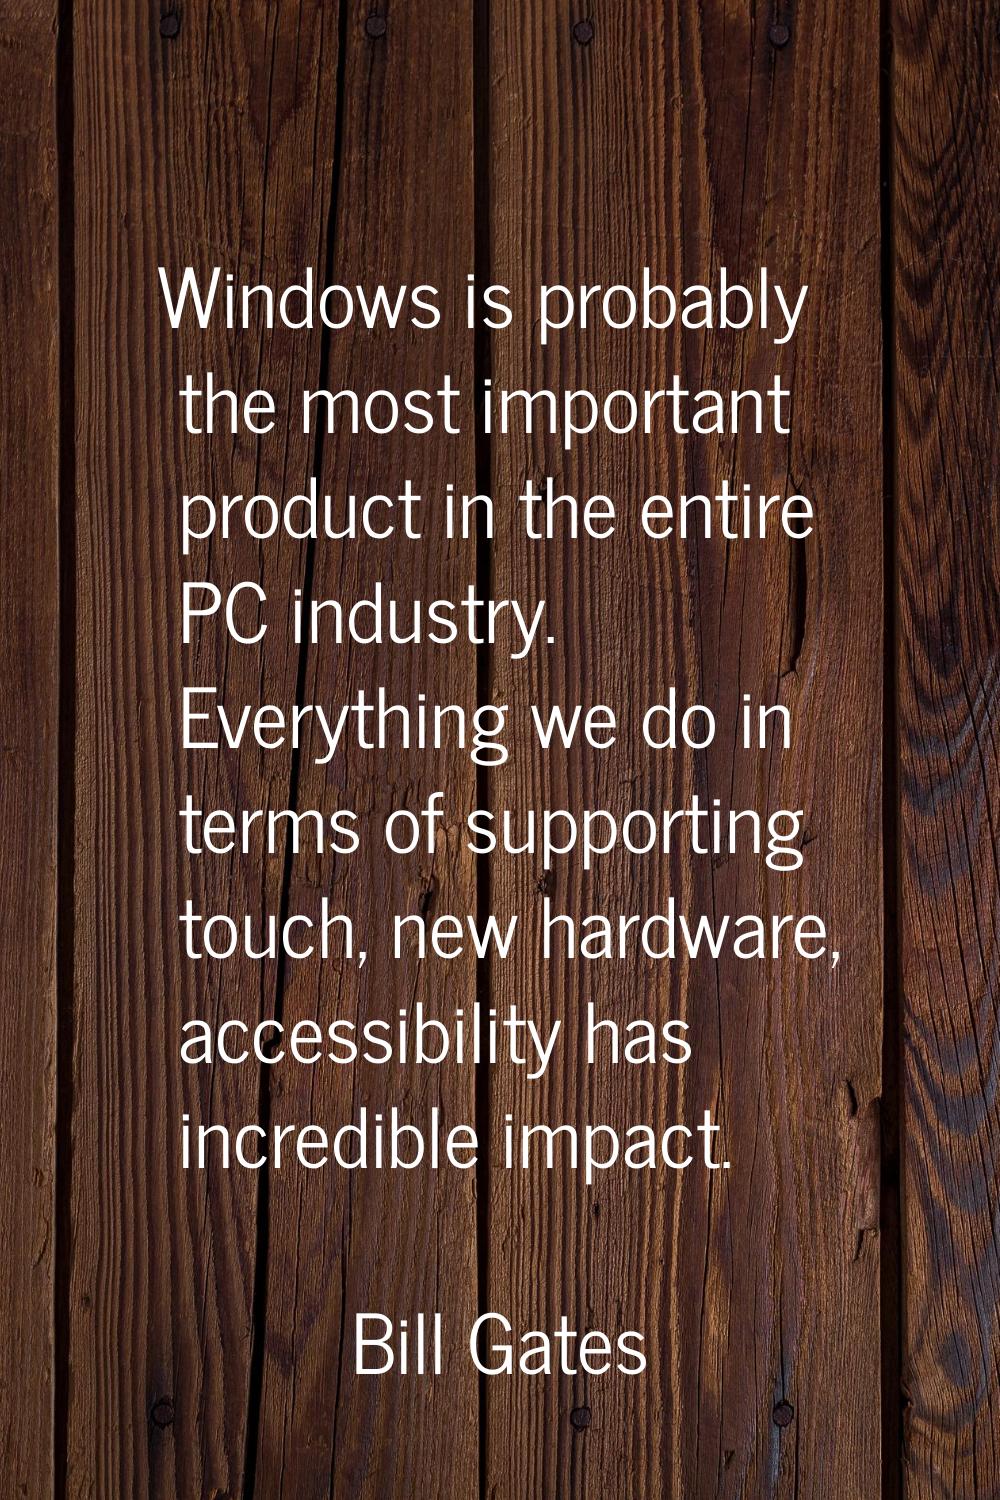 Windows is probably the most important product in the entire PC industry. Everything we do in terms